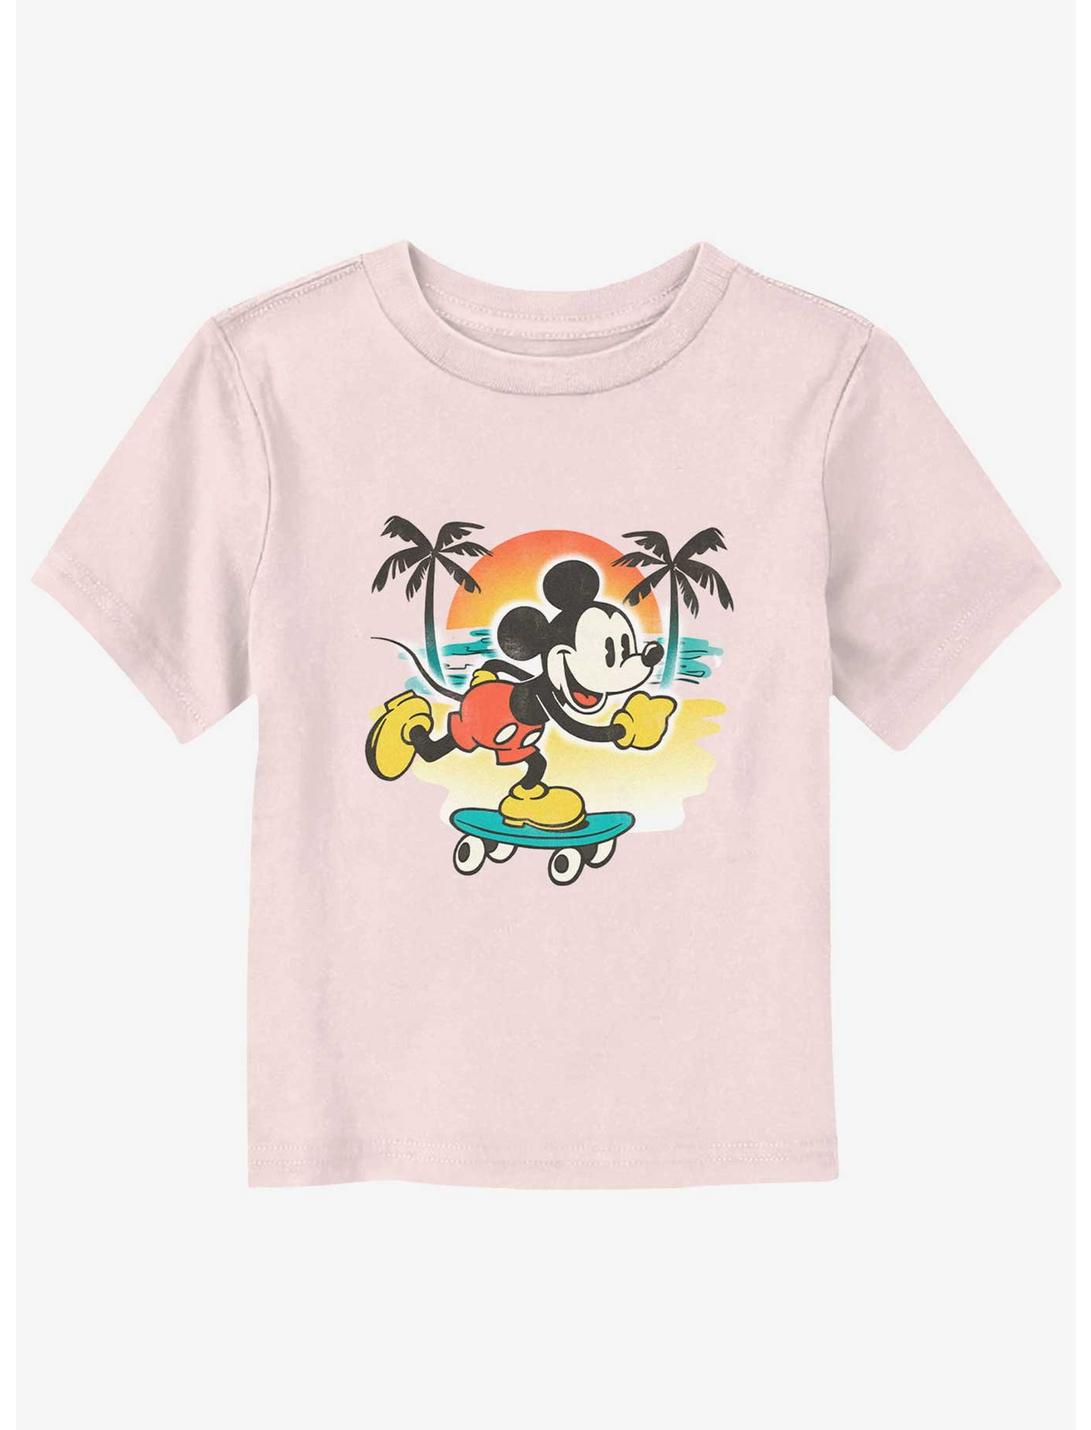 Disney Mickey Mouse Skating By The Beach Toddler T-Shirt, LIGHT PINK, hi-res